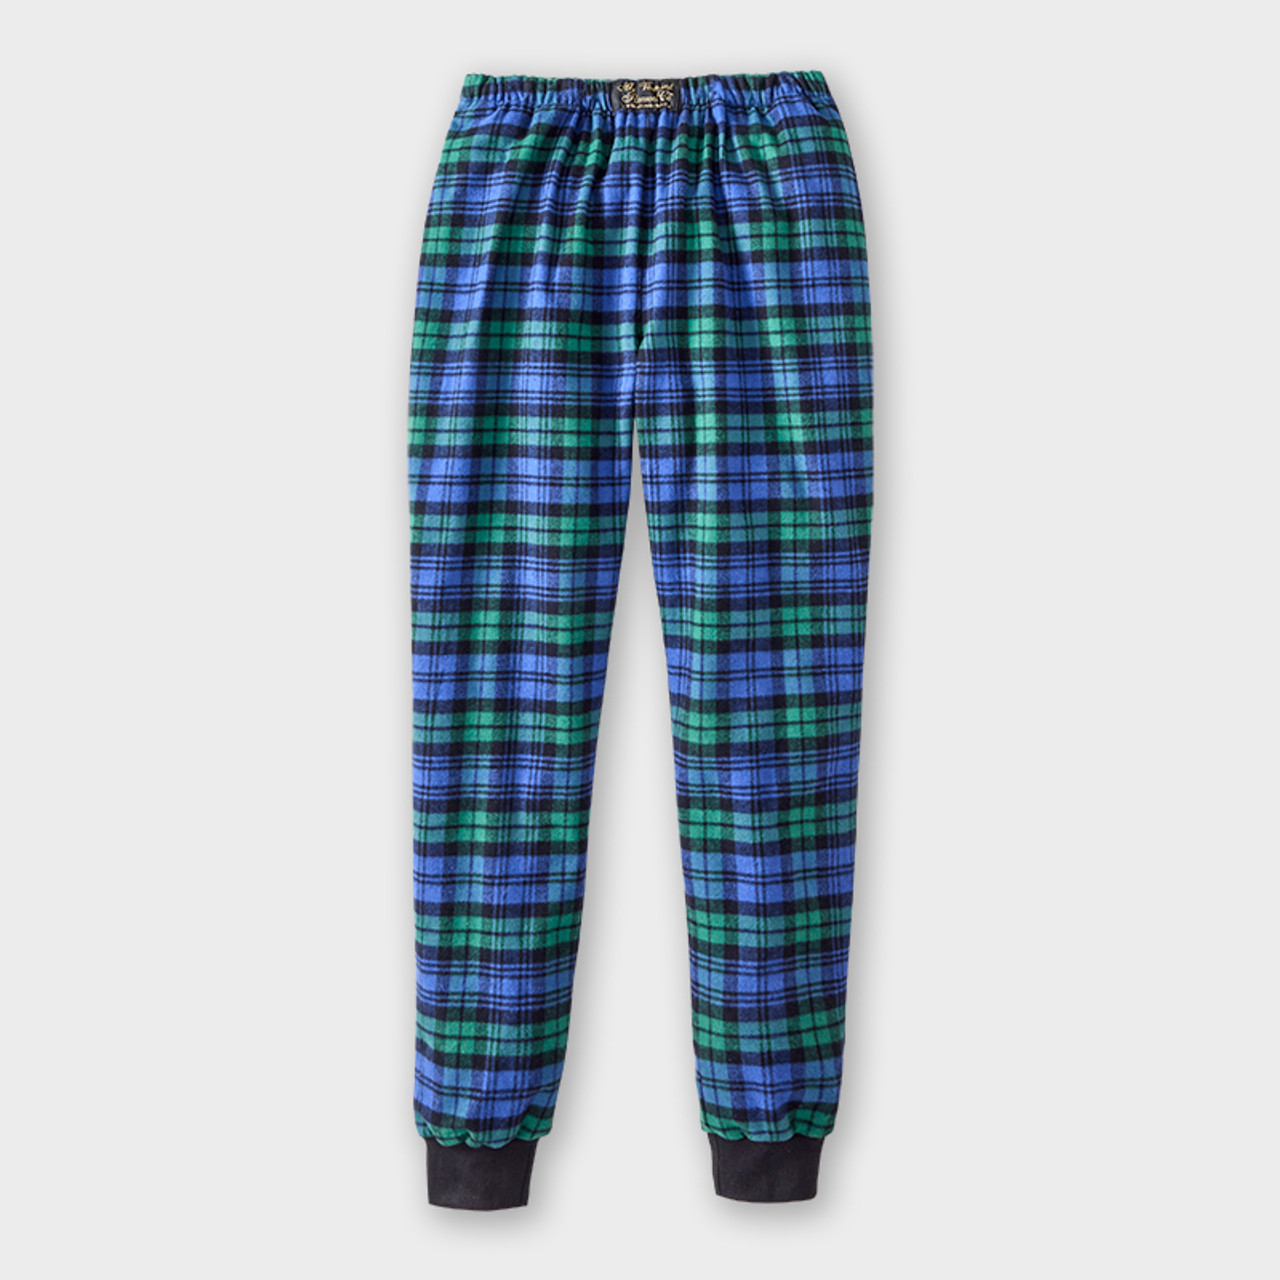 Men's Flannel Pajama Shorts - Super Soft Cotton Plaid Shorts with Pockets  and Drawstrings - Sleep and Lounge Design 5, X-Large